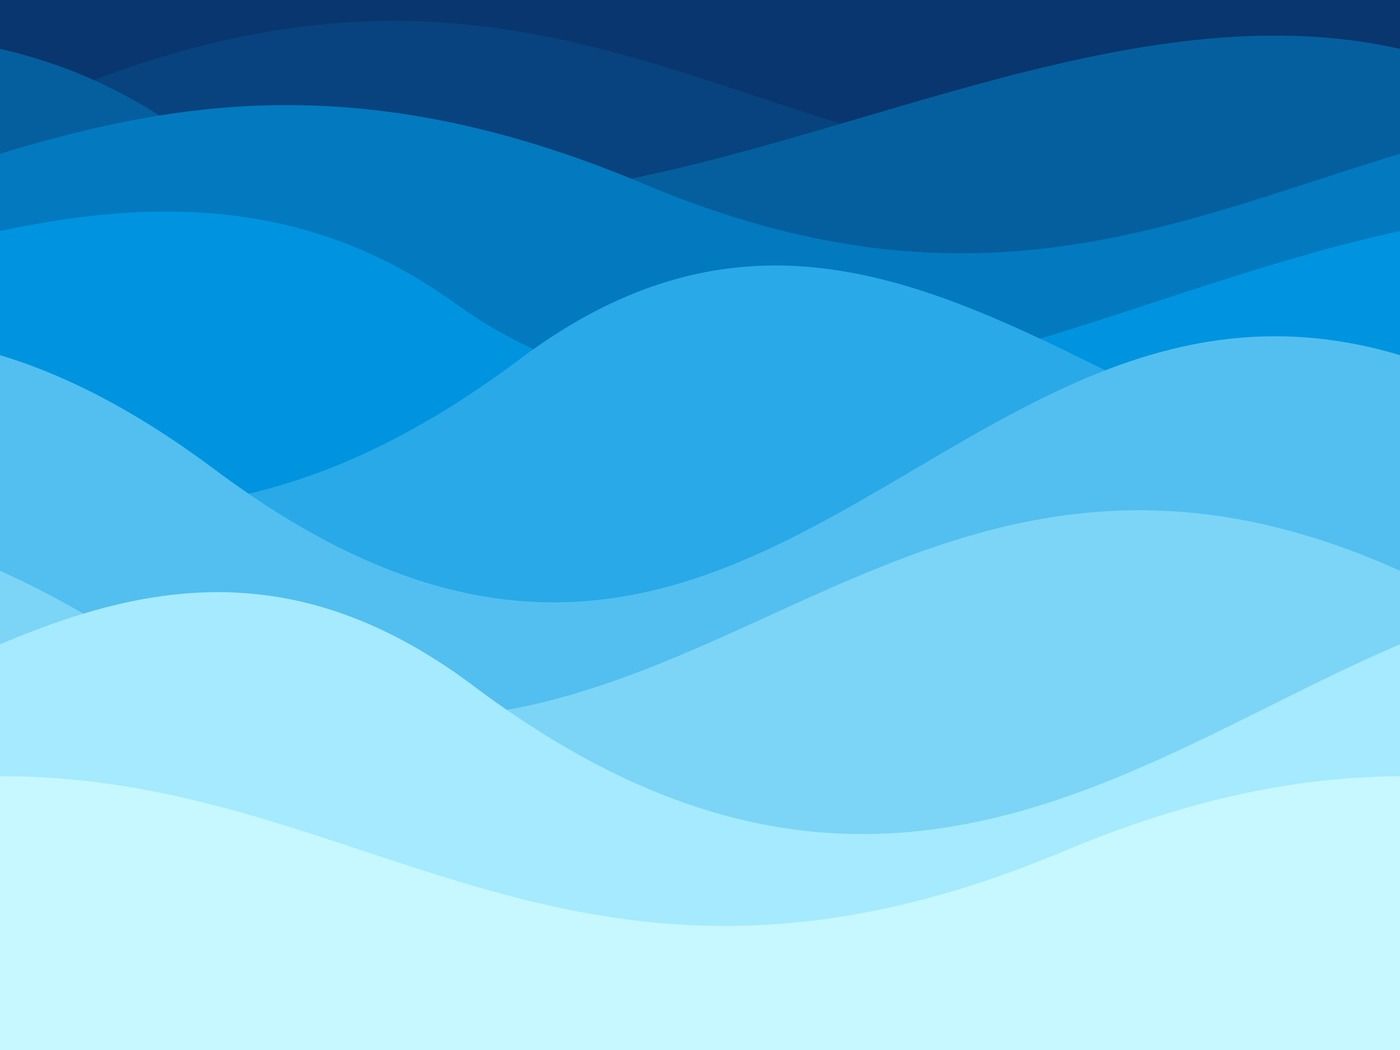 Blue waves pattern. Summer lake wave, water flow abstract vector seaml By  Tartila